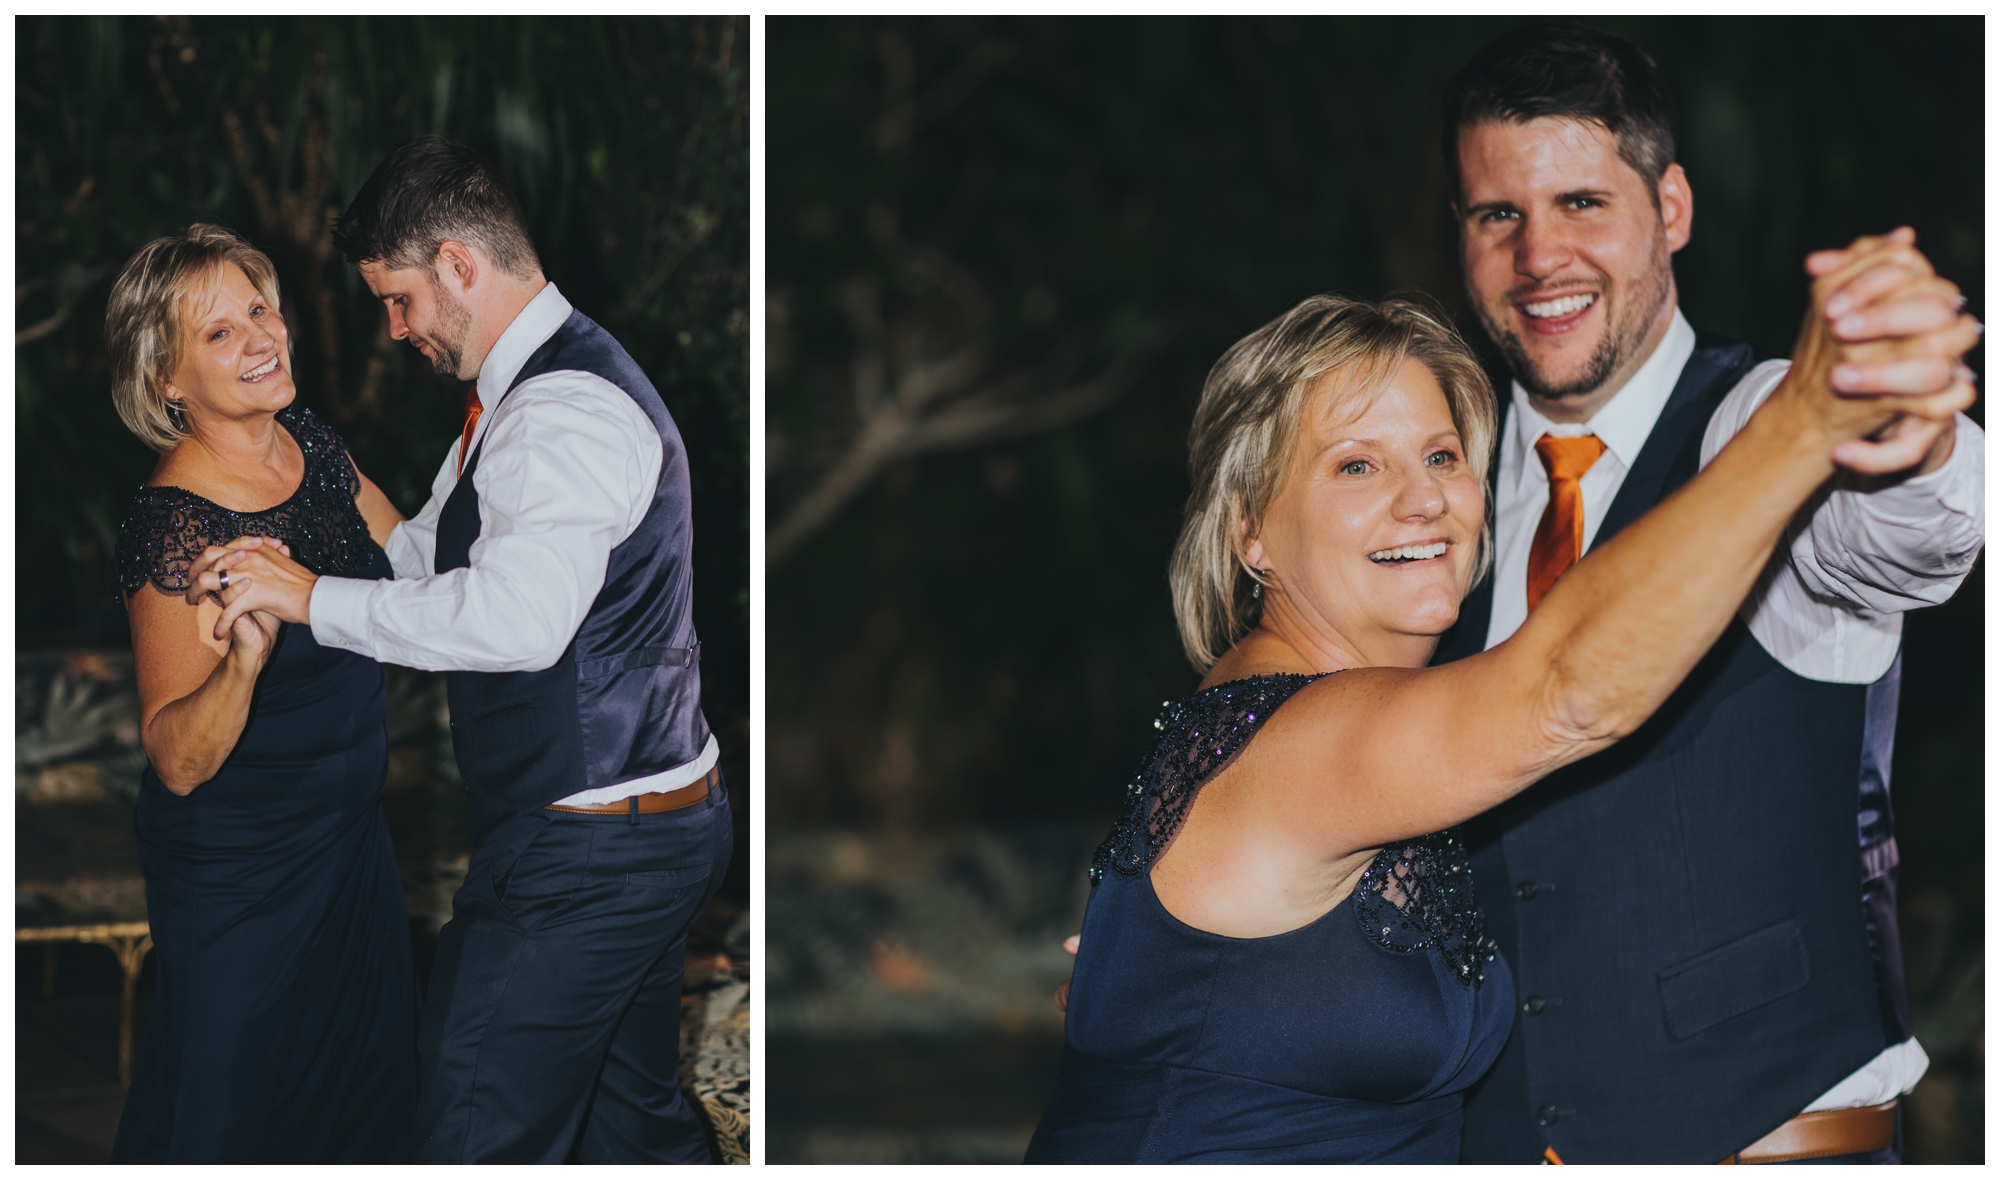 dance with mother of groom at wedding, mother son wedding dance